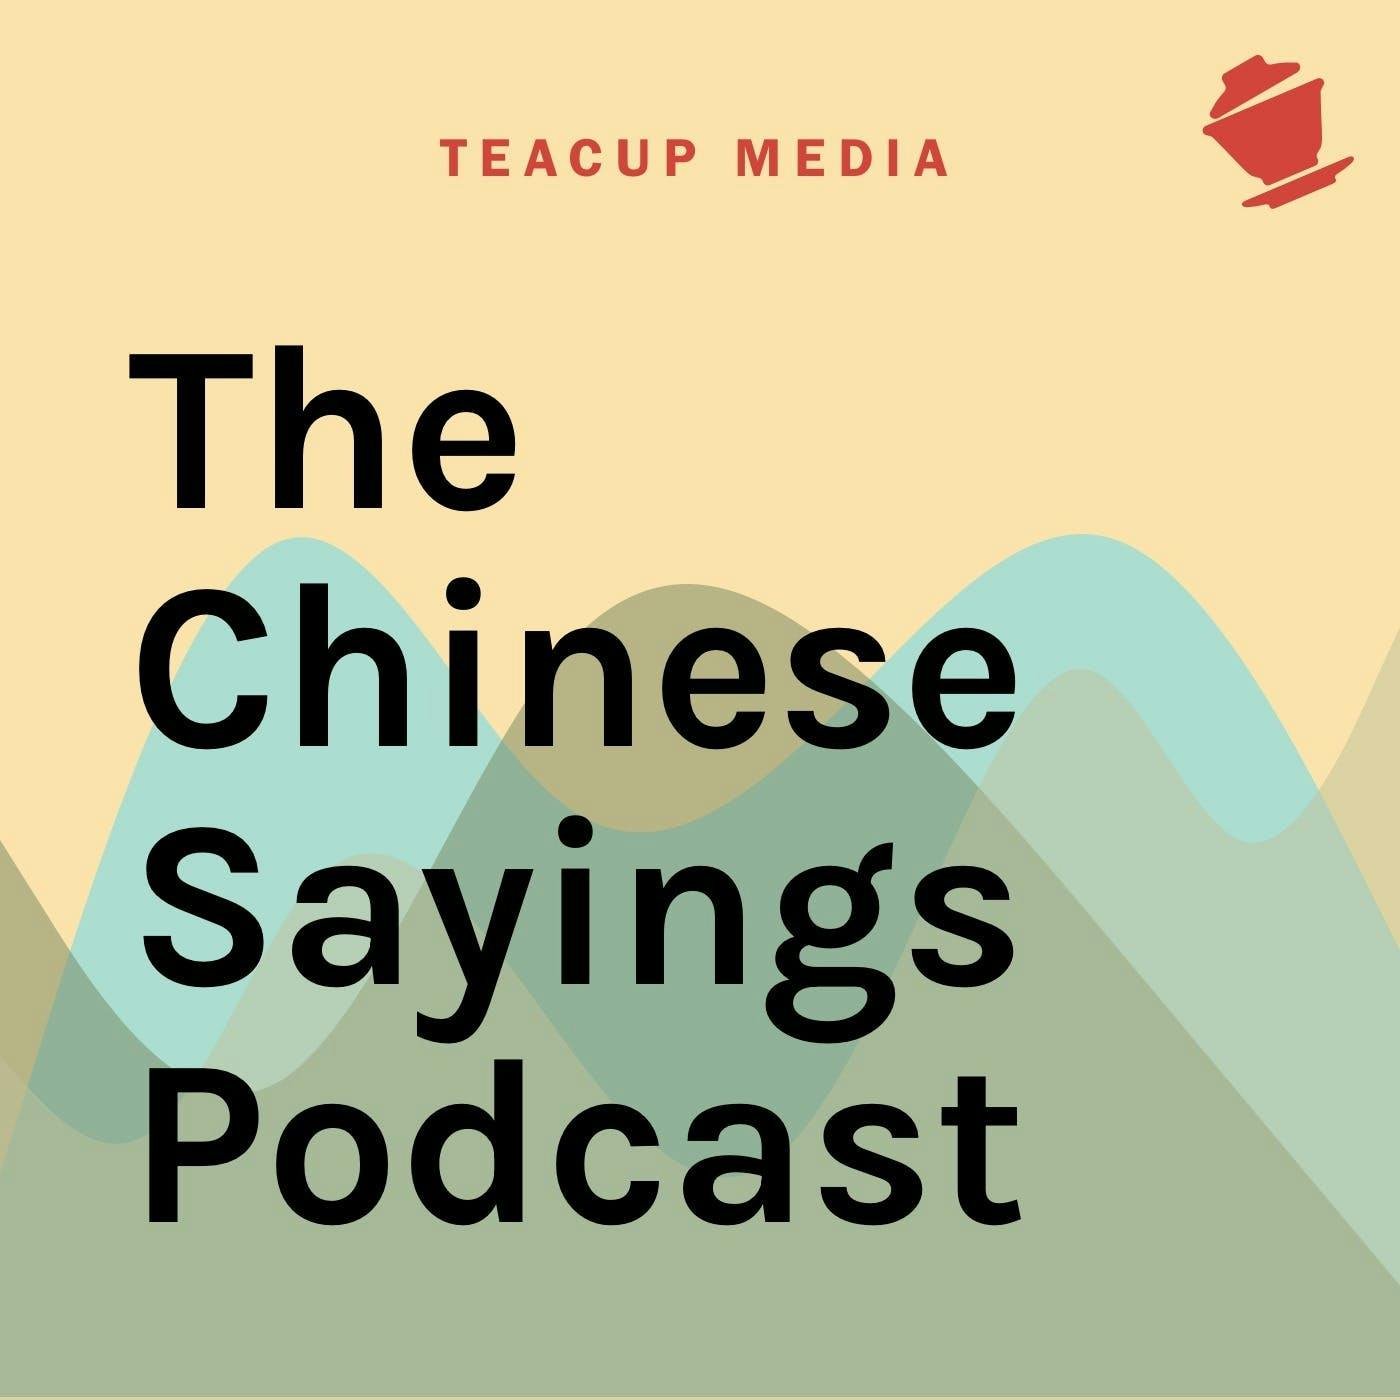 The Chinese Sayings Podcast